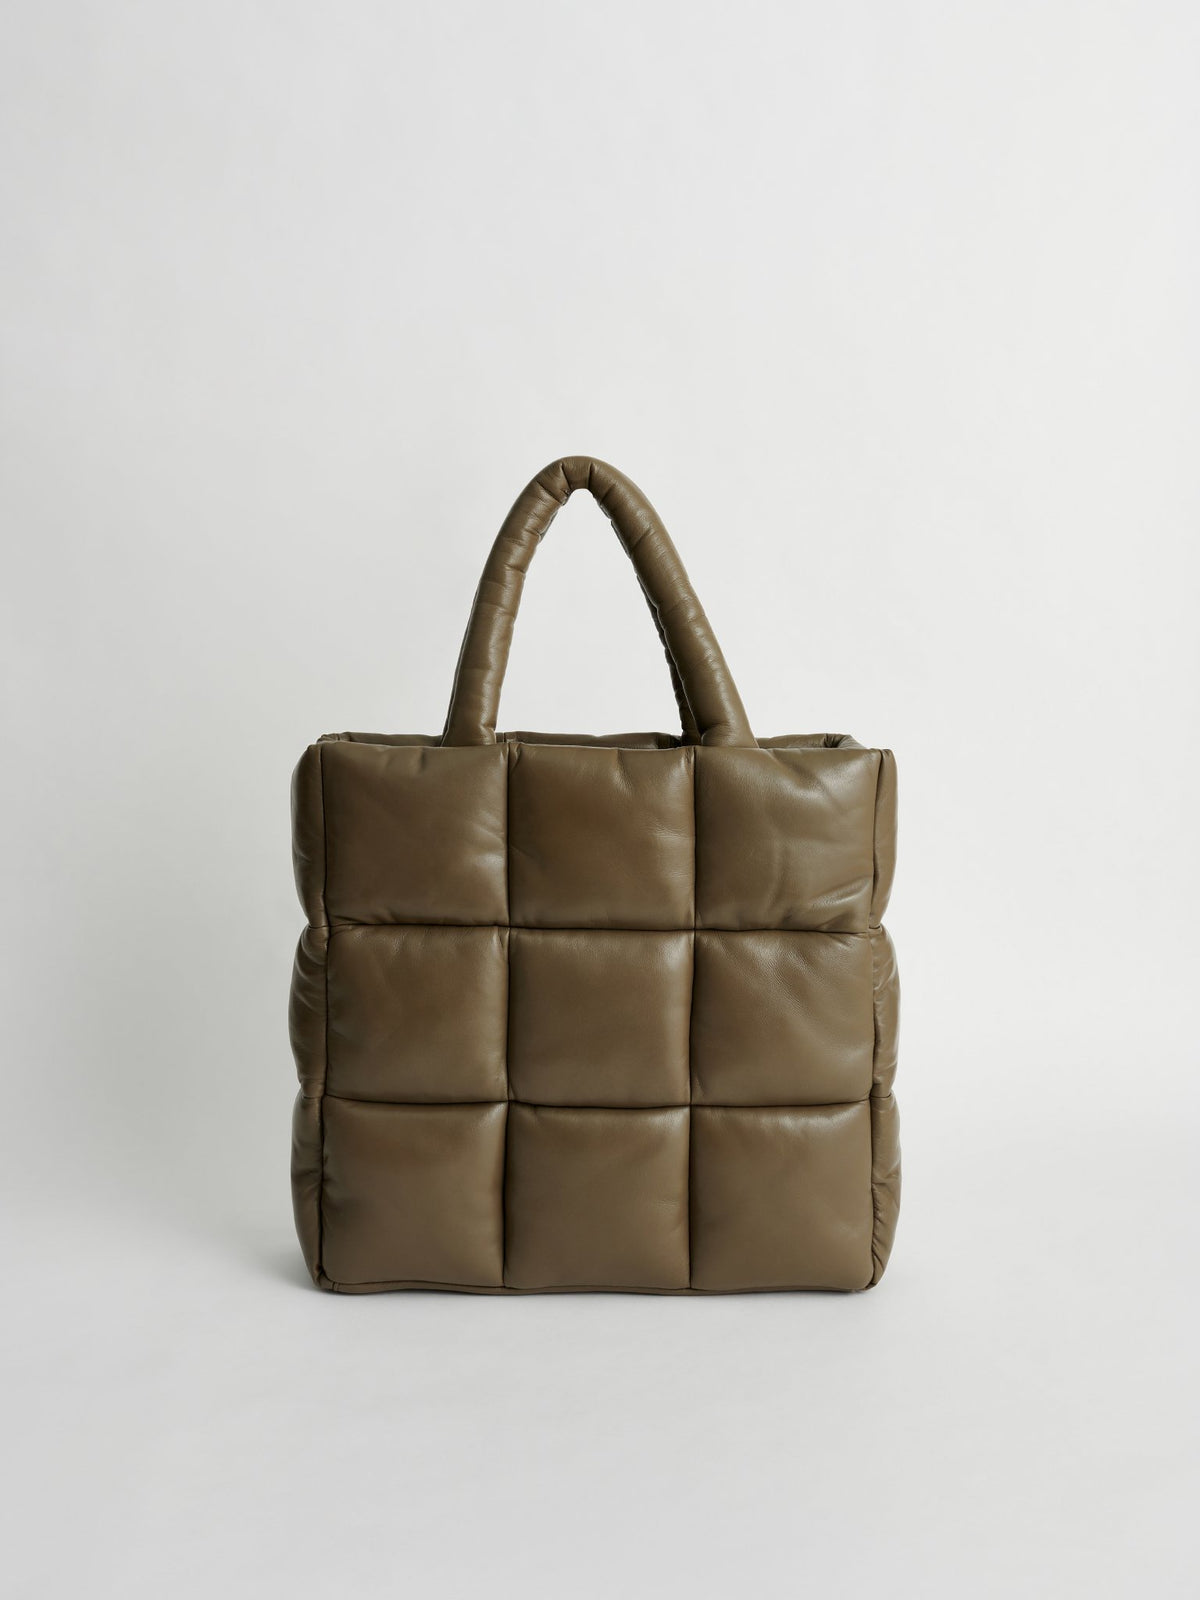 STAND Assante Puffy Bag in Saddle Brown